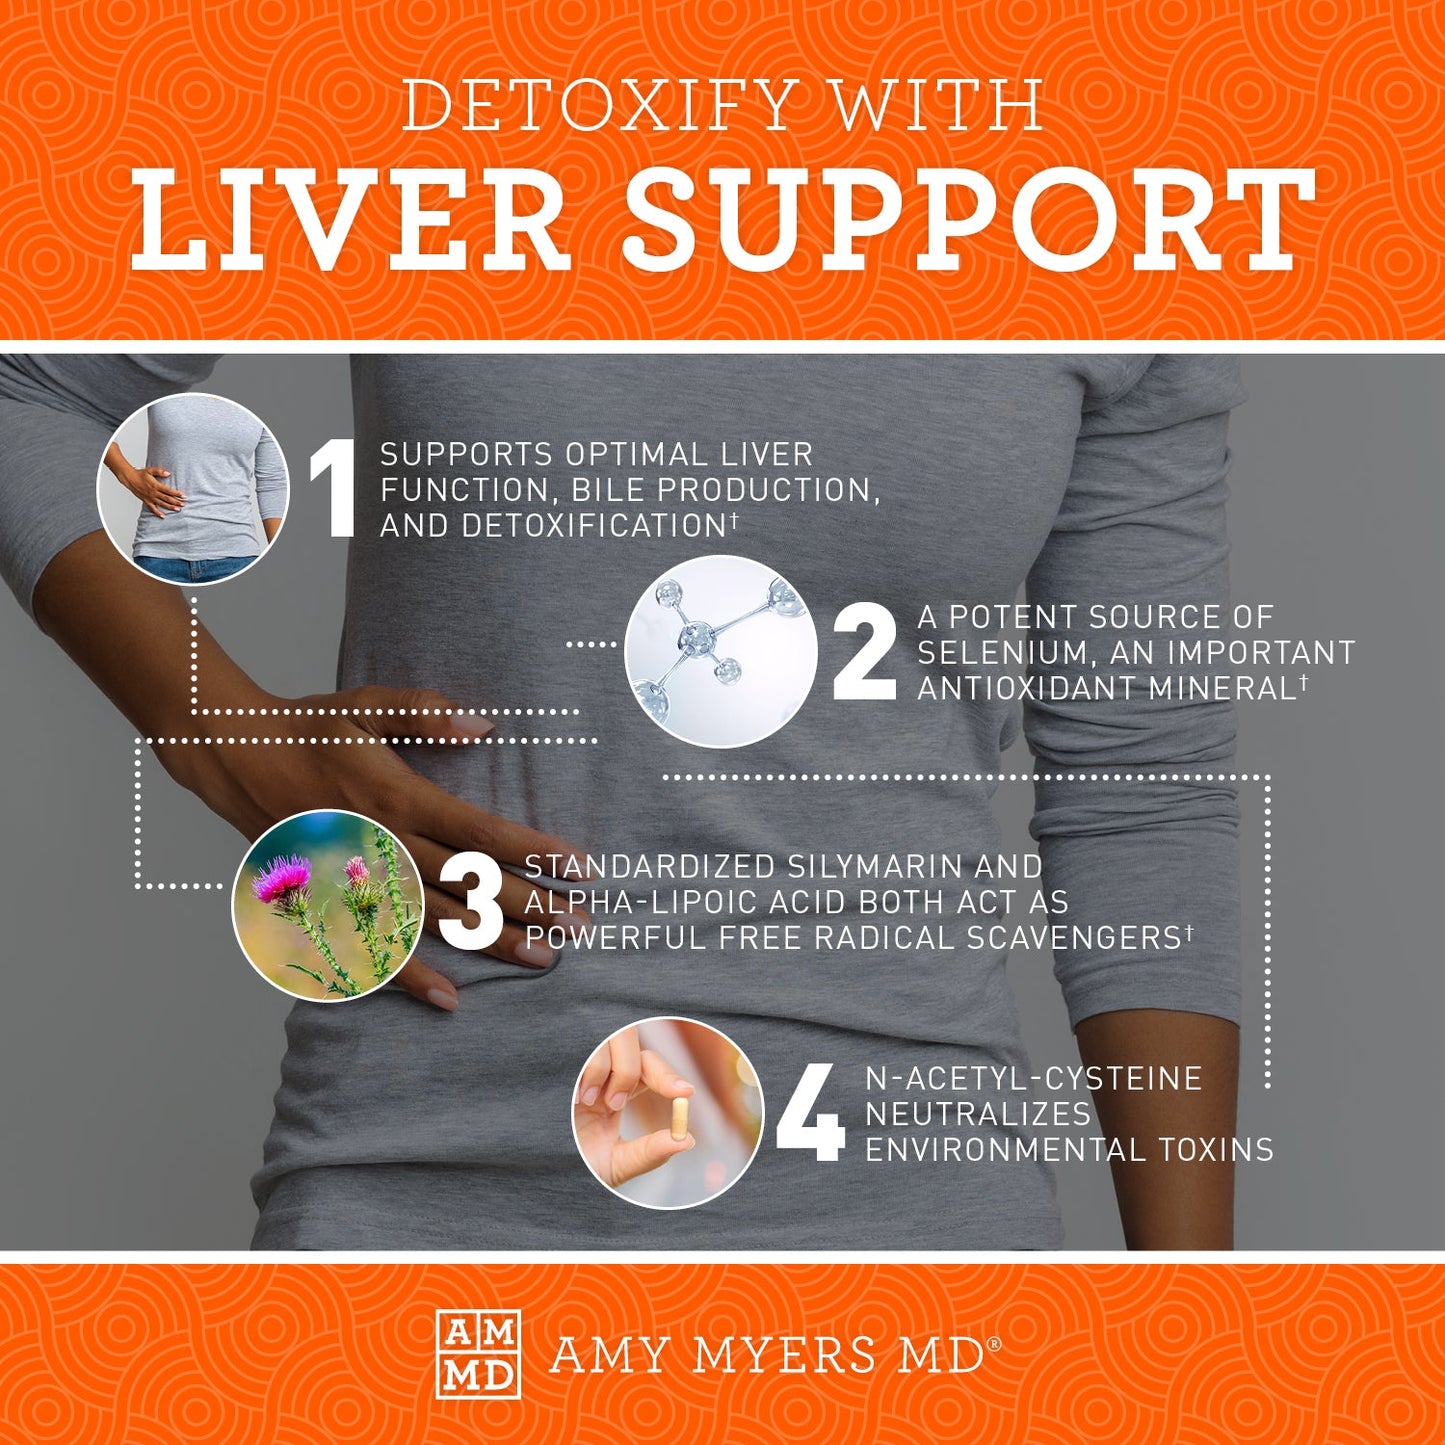 Liver Support by Amy Myers MD